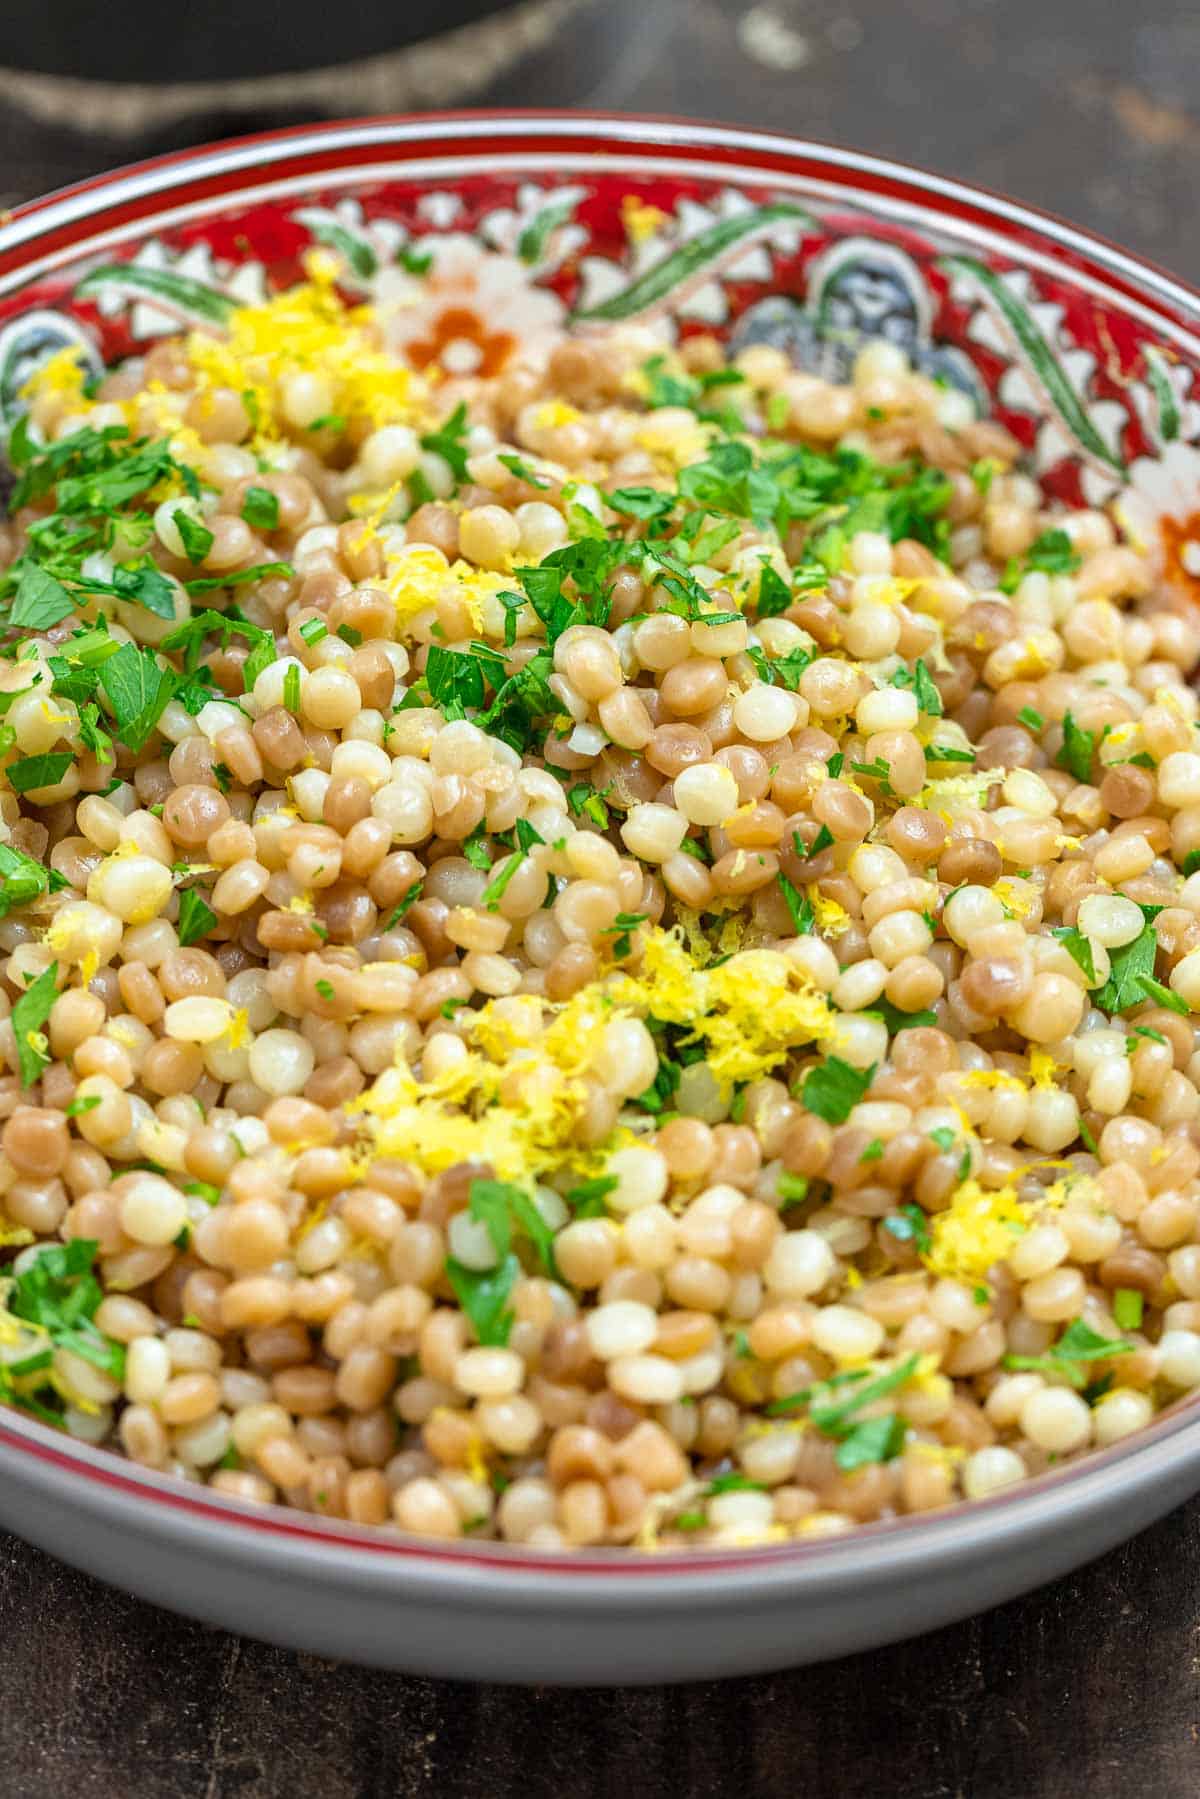 Israeli couscous with fresh herbs and lemon zest in a bowl.